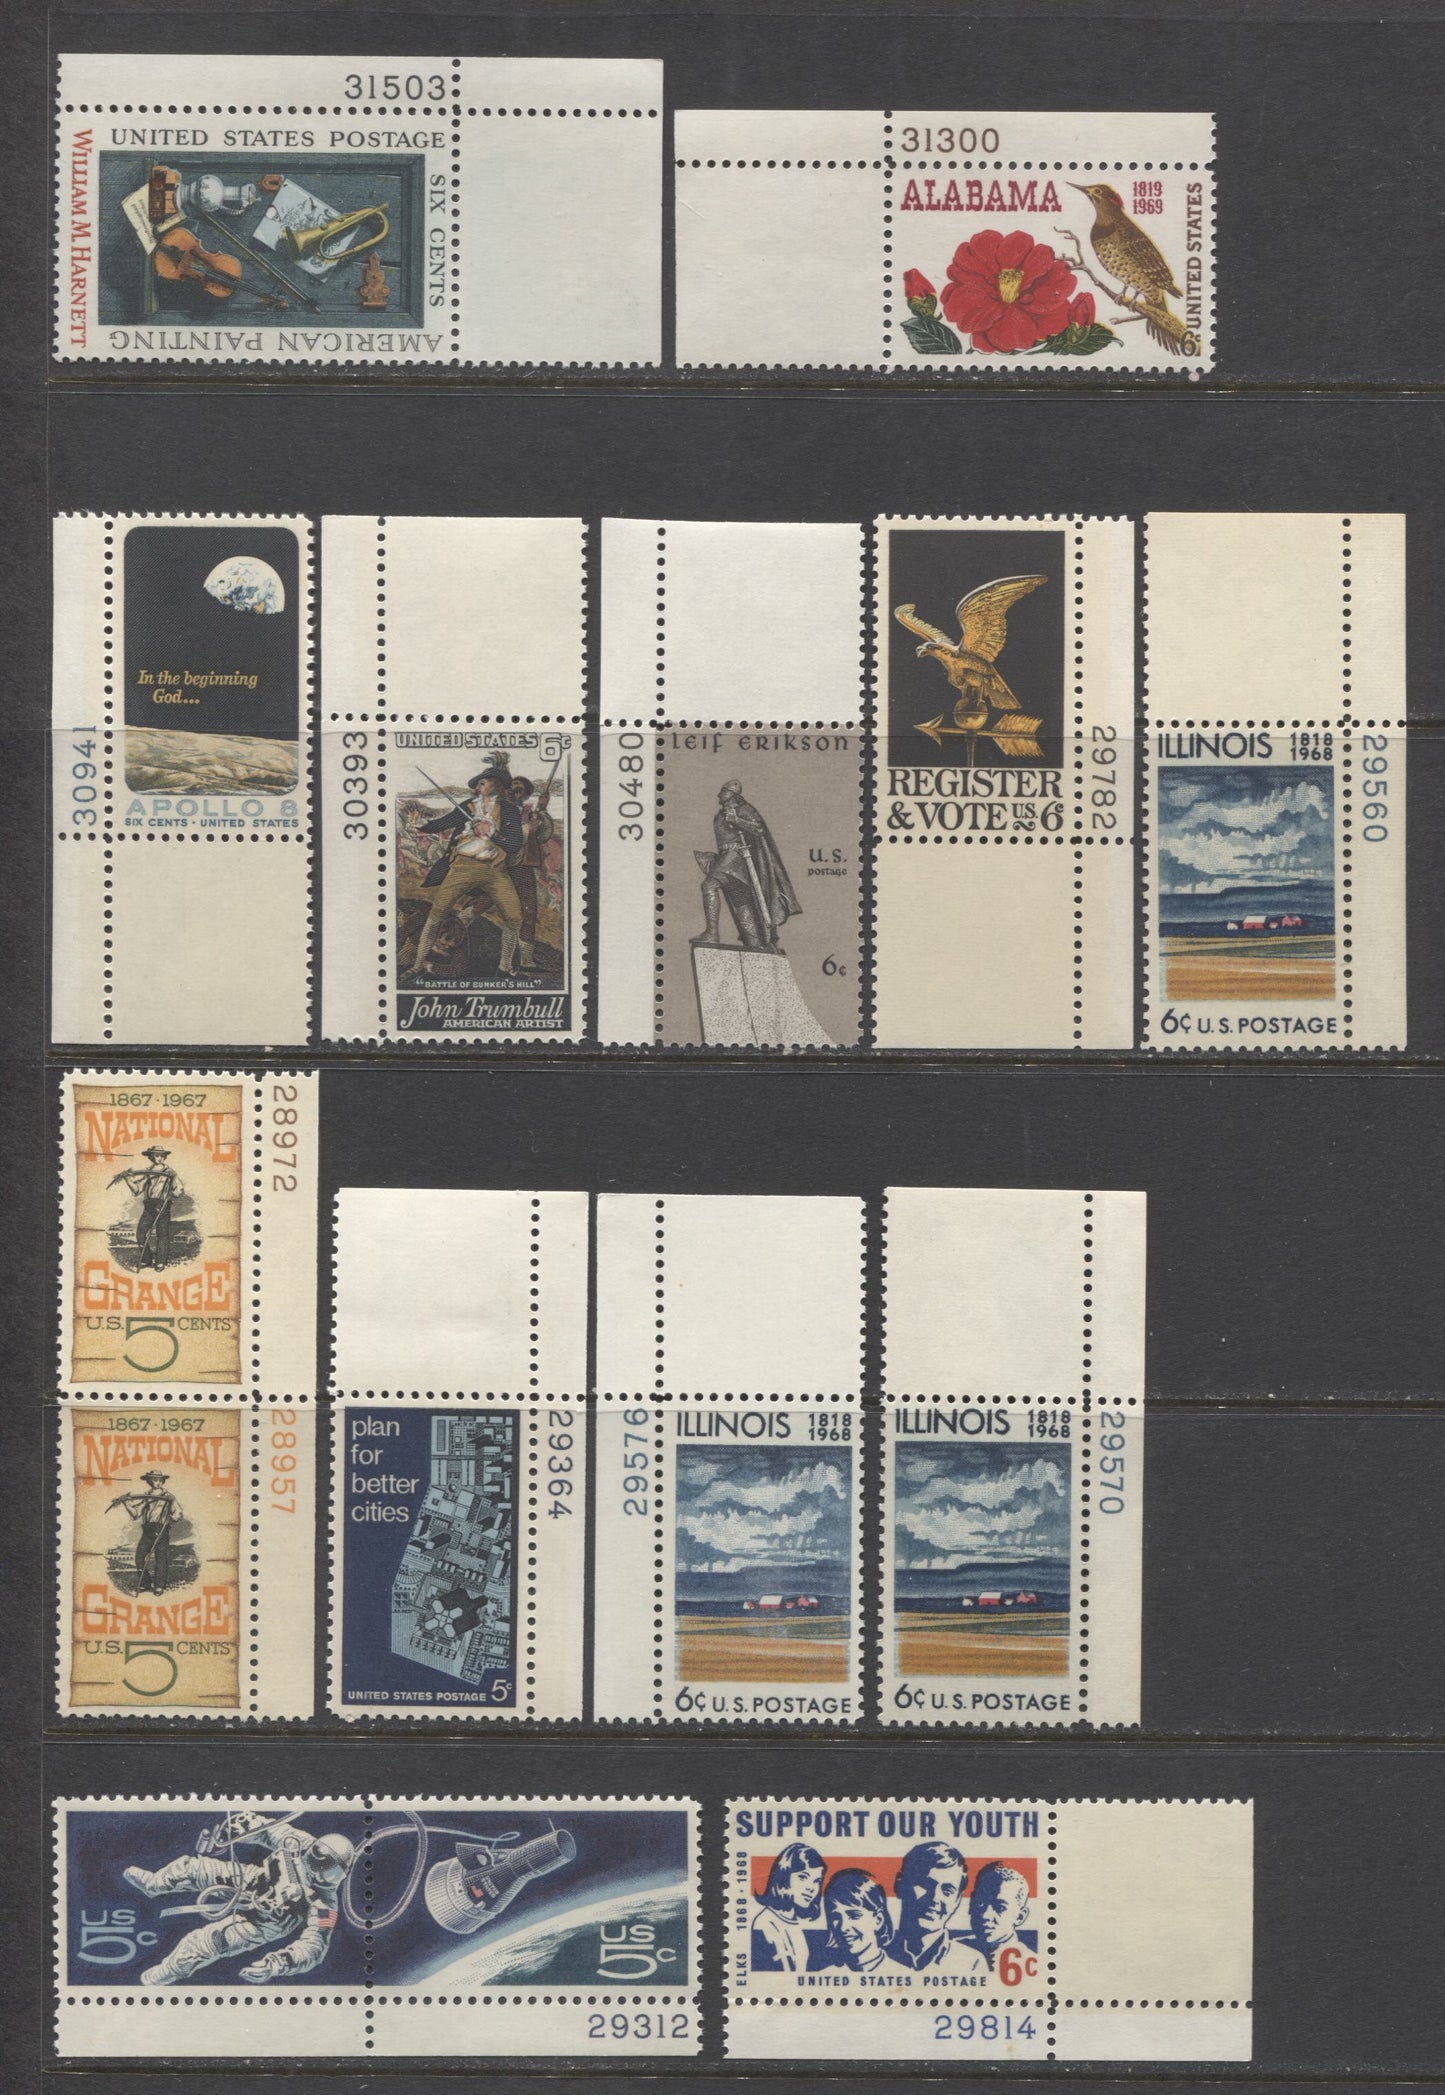 Lot 143 United States SC#1306/1386 1966-1969 Commemorative Issues, 54 VF/XFNH Plate Number Singles, Pairs & Blocks. 2017 Scott Cat. $13.50 USD, Click on Listing to See ALL Pictures